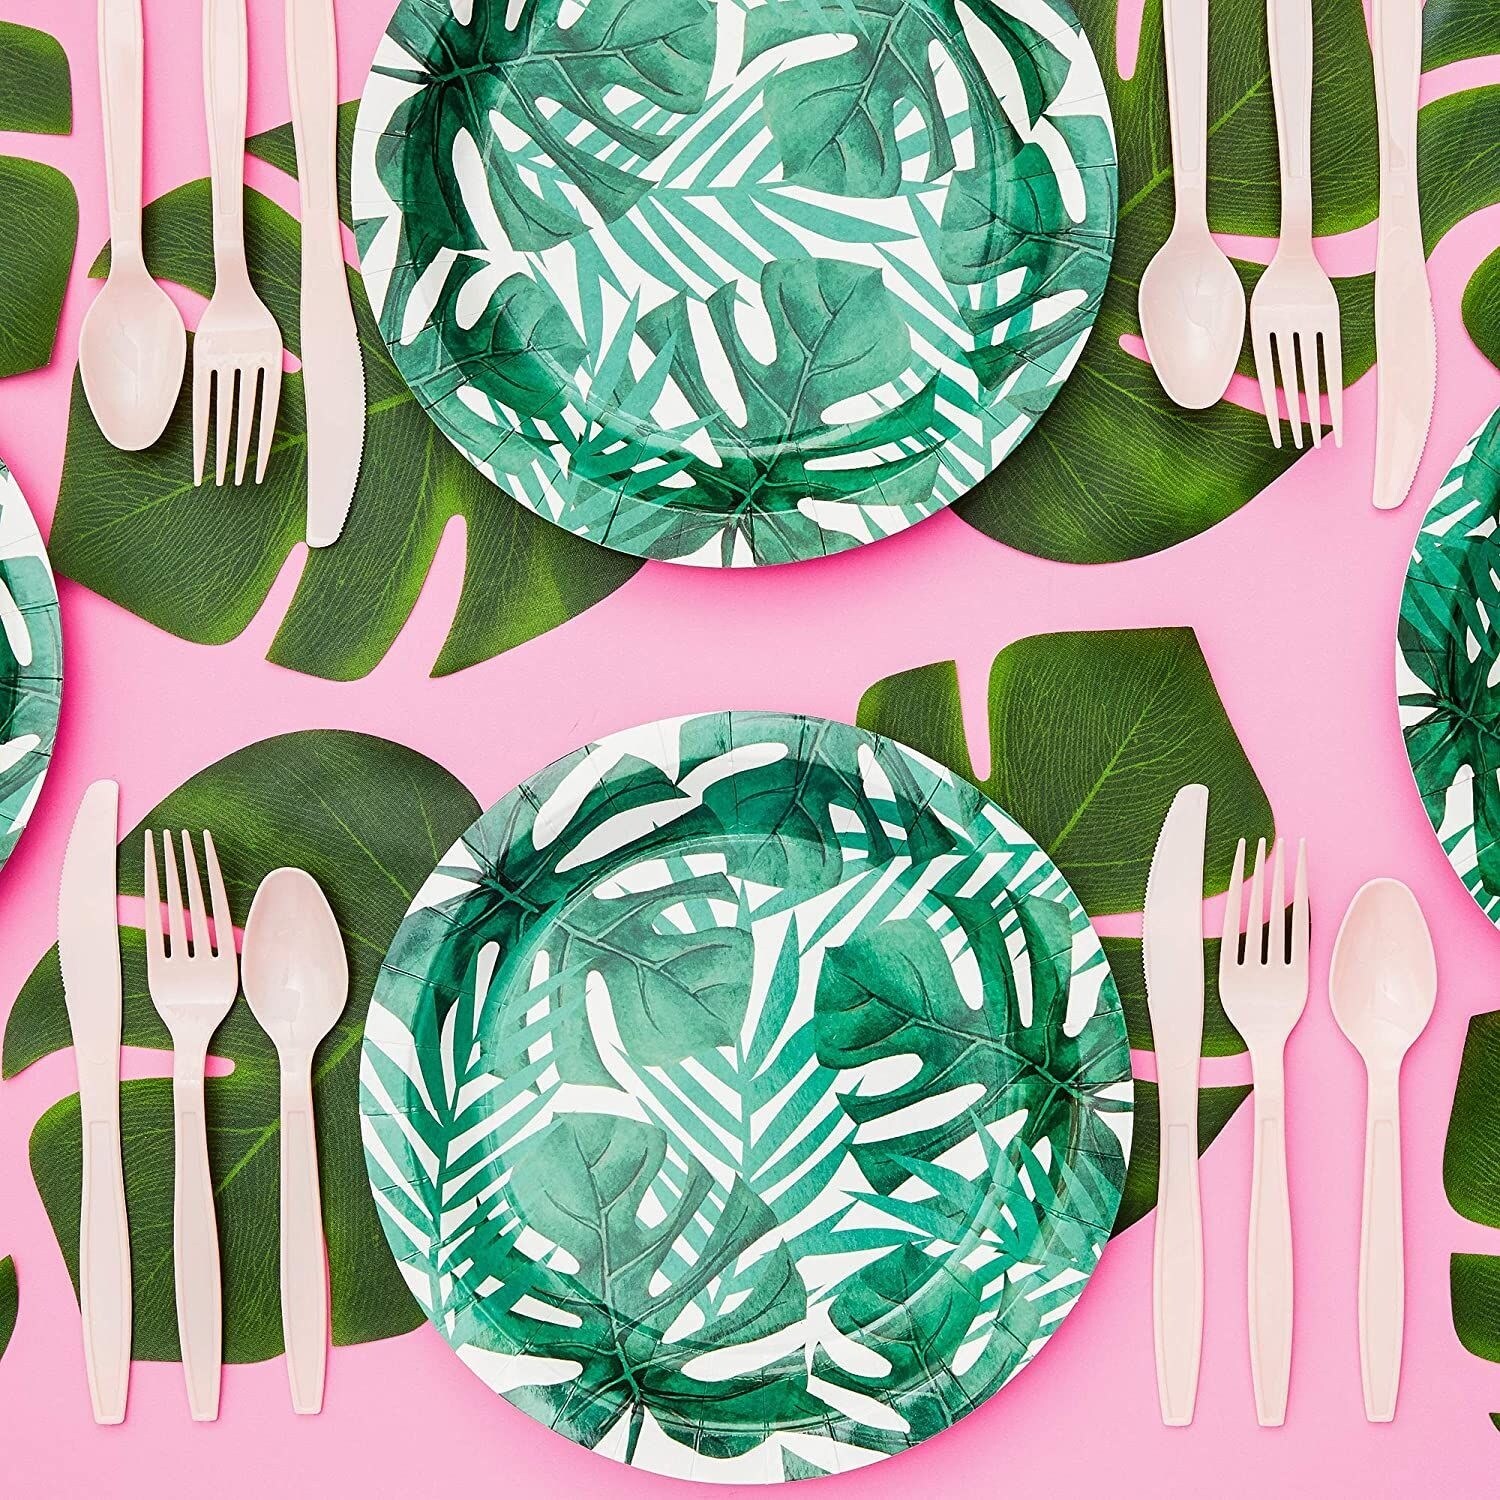 80-Count Disposable Paper Plates, Palm Leaves Design with Pink Background, 9 In